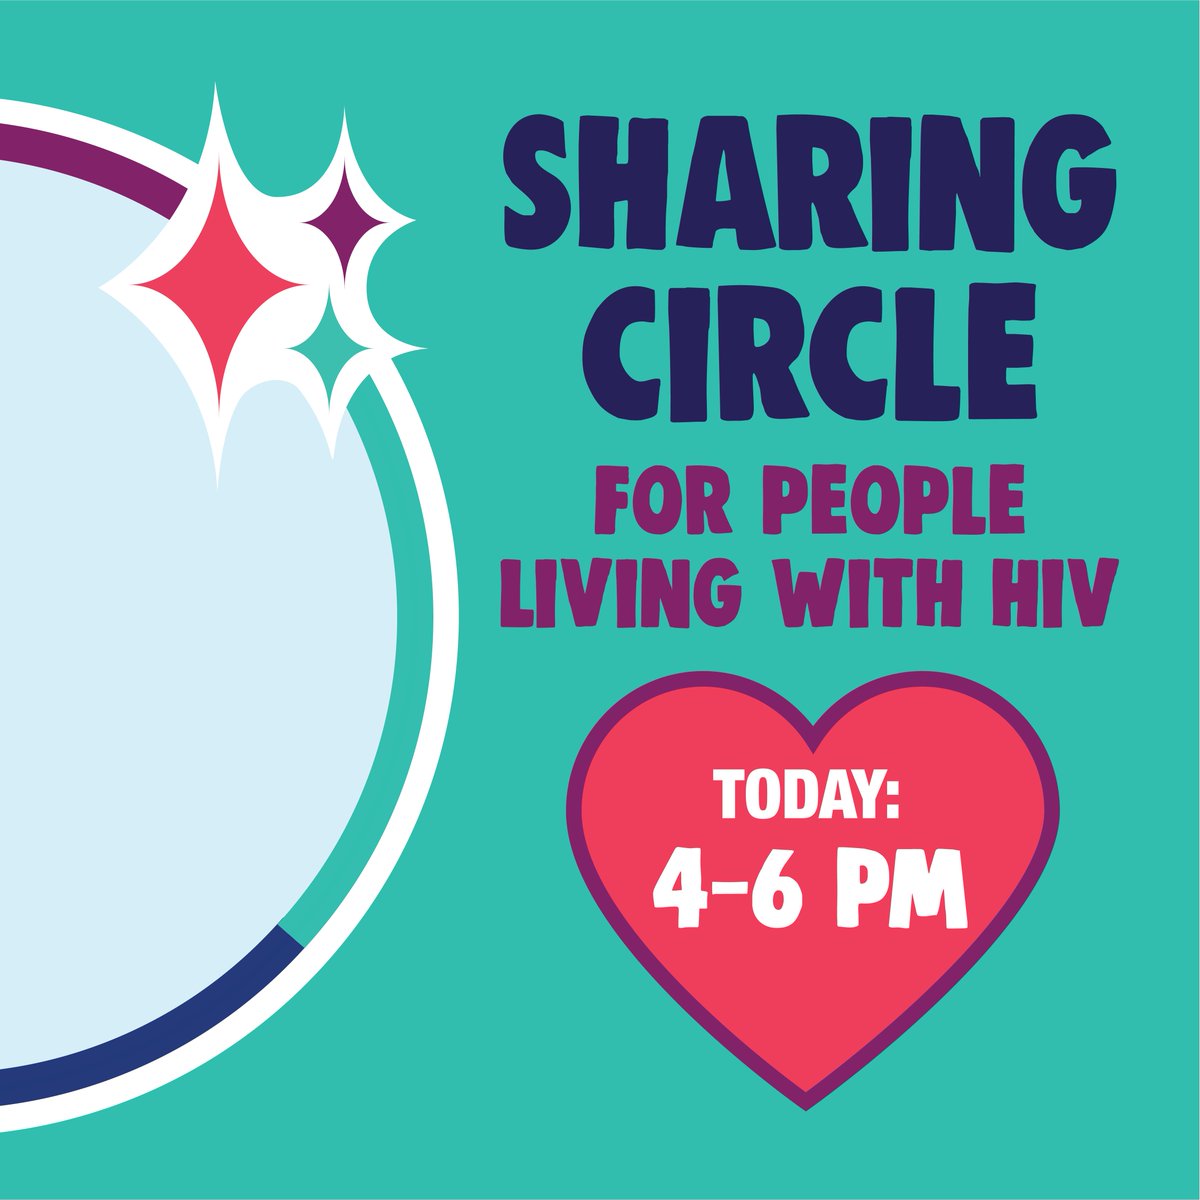 All of US Sharing Circle for people living with HIV. Sharing Circles will be led by a Knowledge Holder.

765 Main Street 4-6 p.m. 

#GoAskAuntie 
#STBBIAwareness
#SexualHealth
#SexualWellness
#StopTheStigma
#SexualHealthServices
#IndigenousSexualHealth
#IndigenousClinic